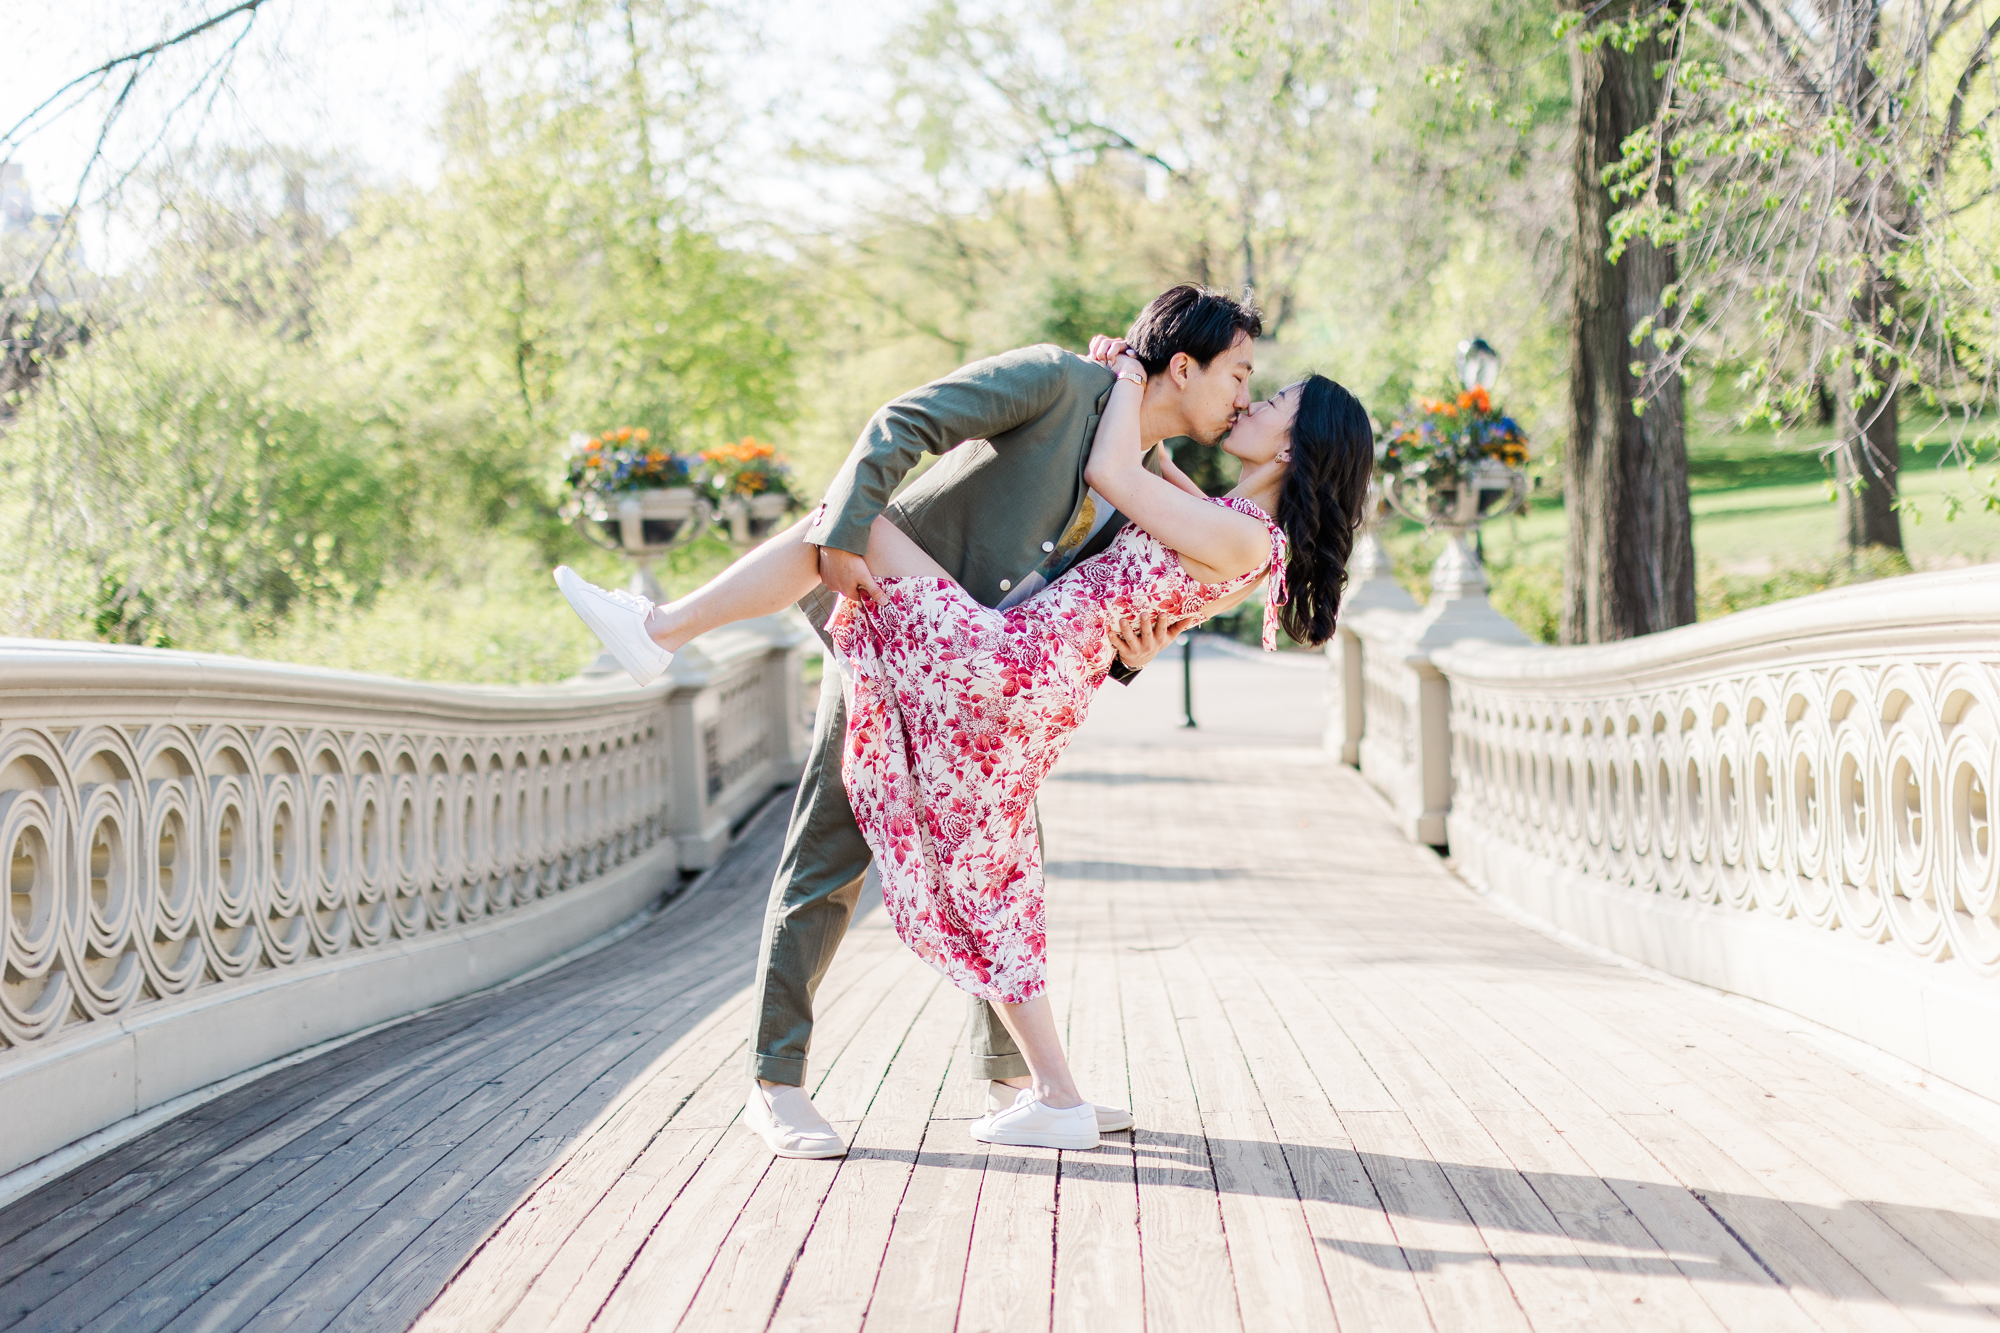 Jaw - Dropping Engagement Photos With Cherry Blossoms in NYC